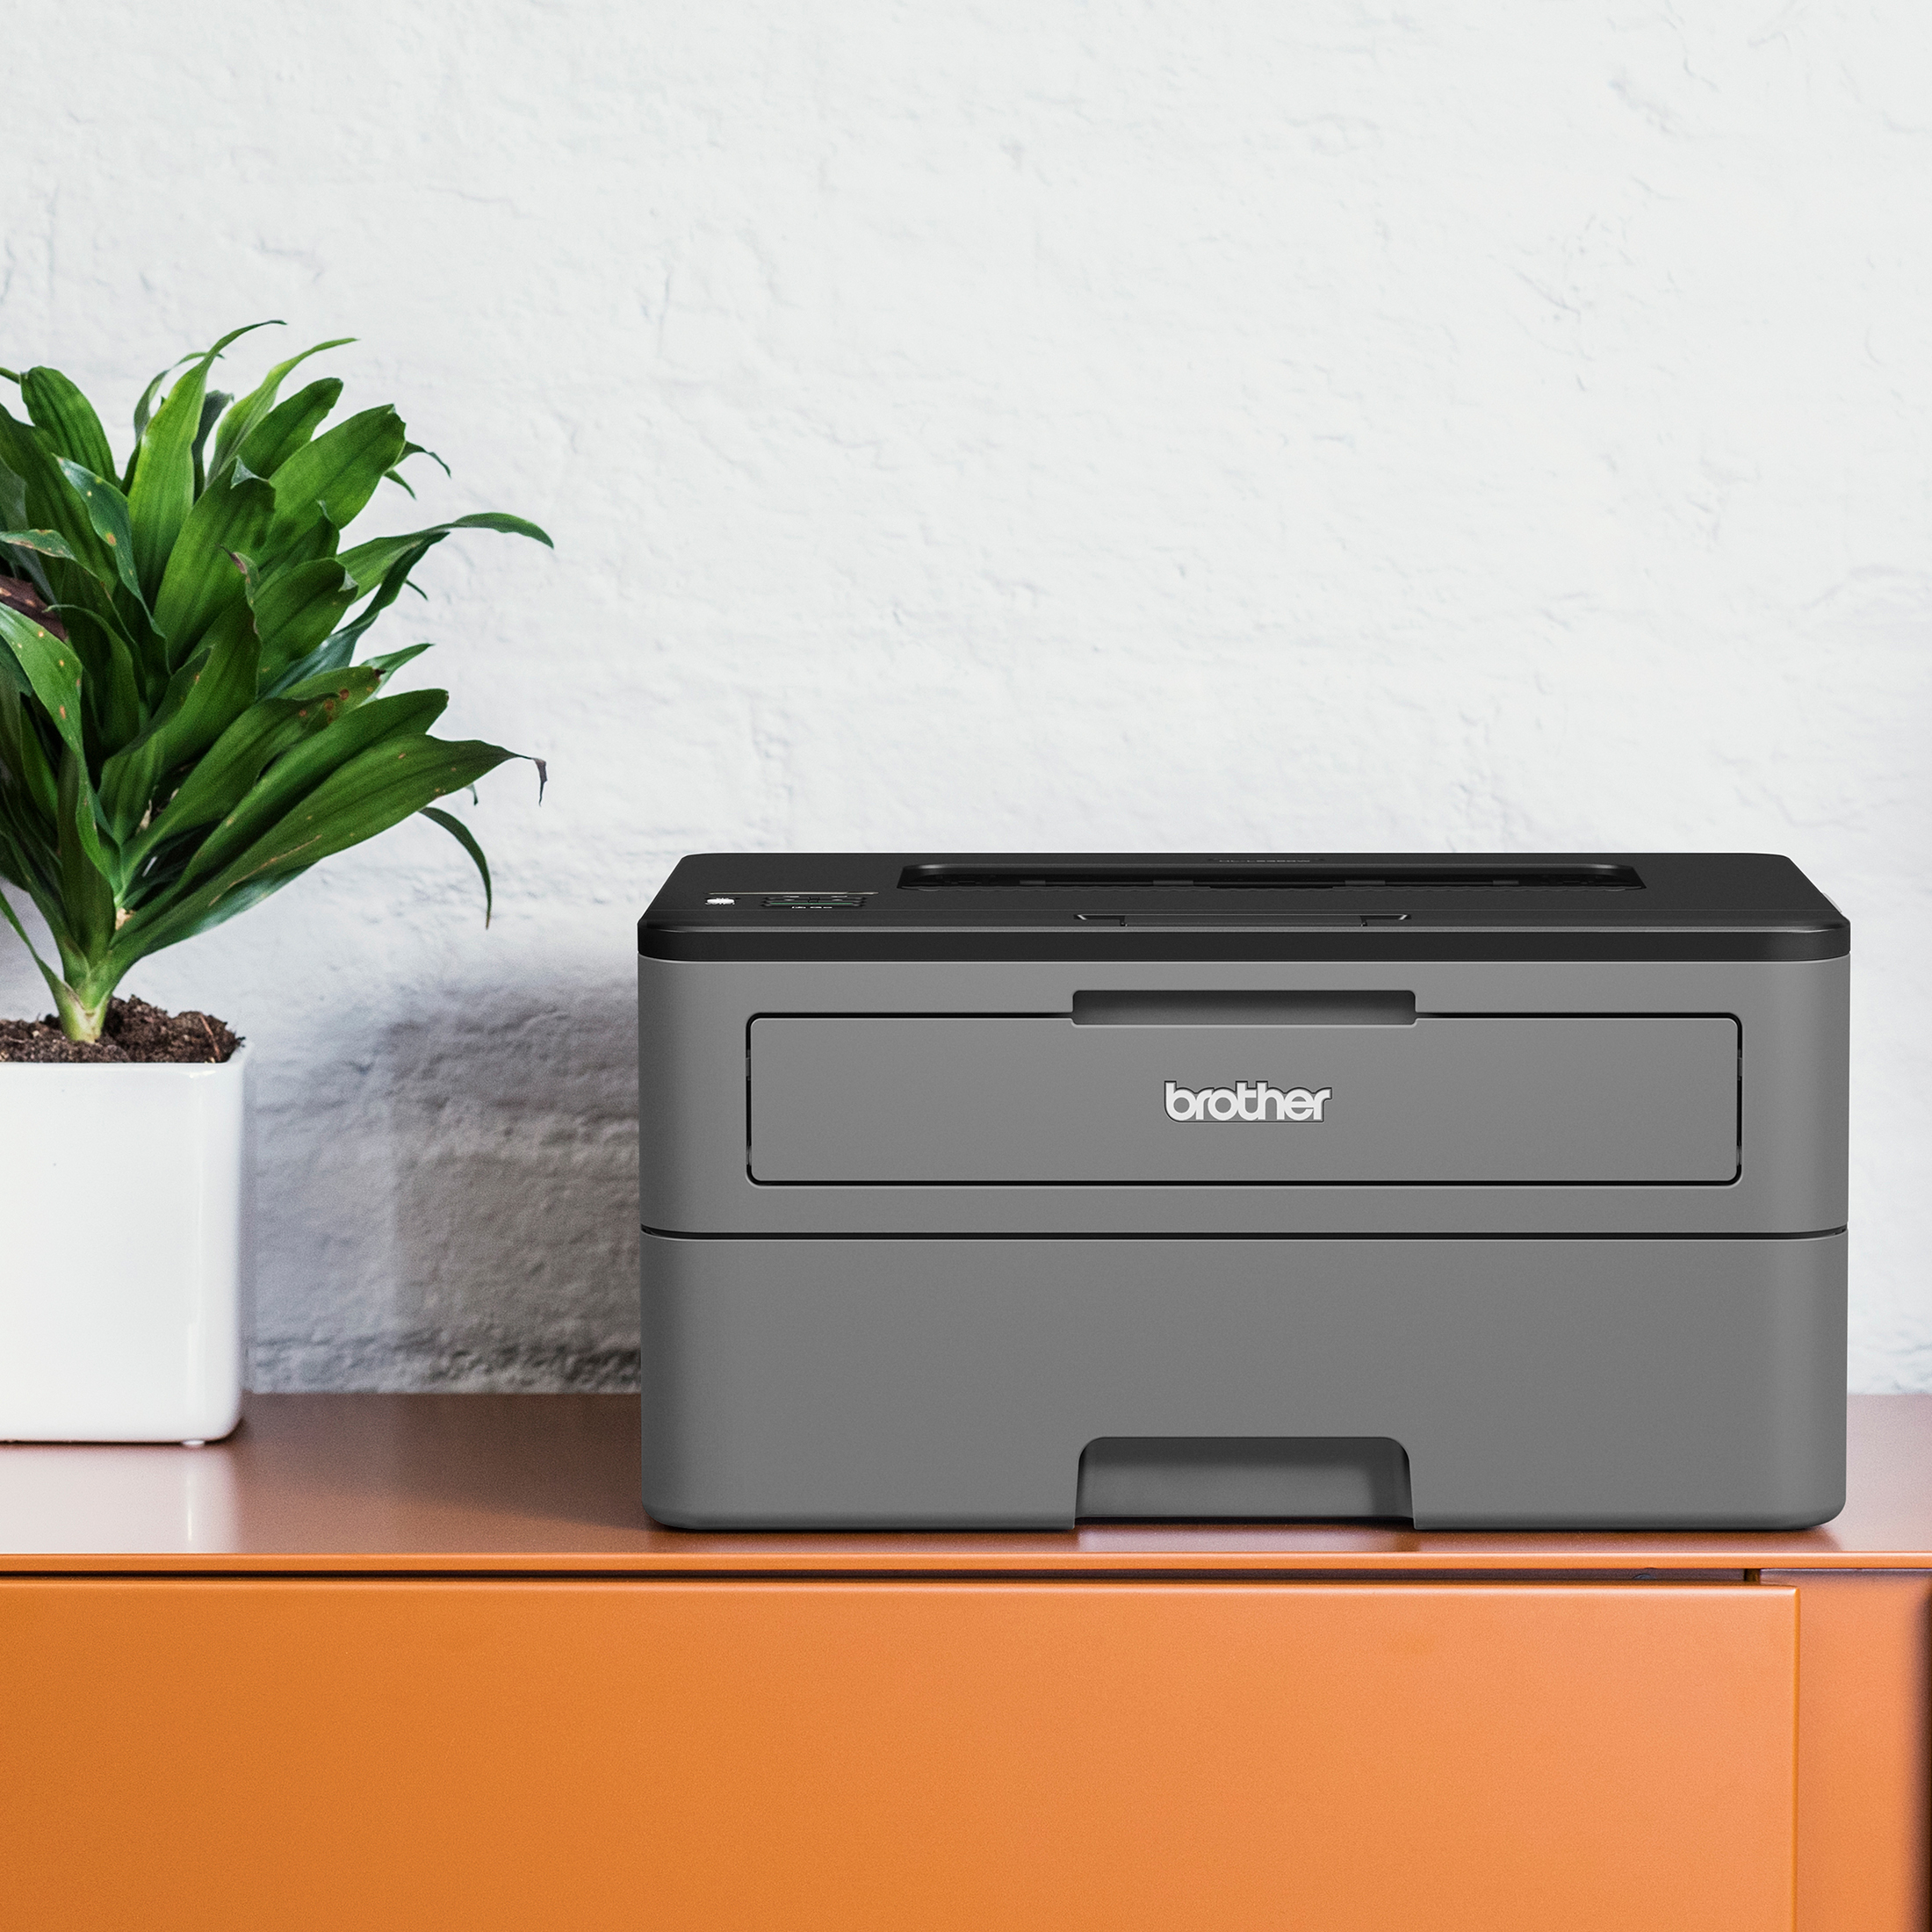 Brother HL-L2305W Compact Mono Laser Single Function Printer with Wireless and Mobile Device Printing¹, Restored - image 4 of 6